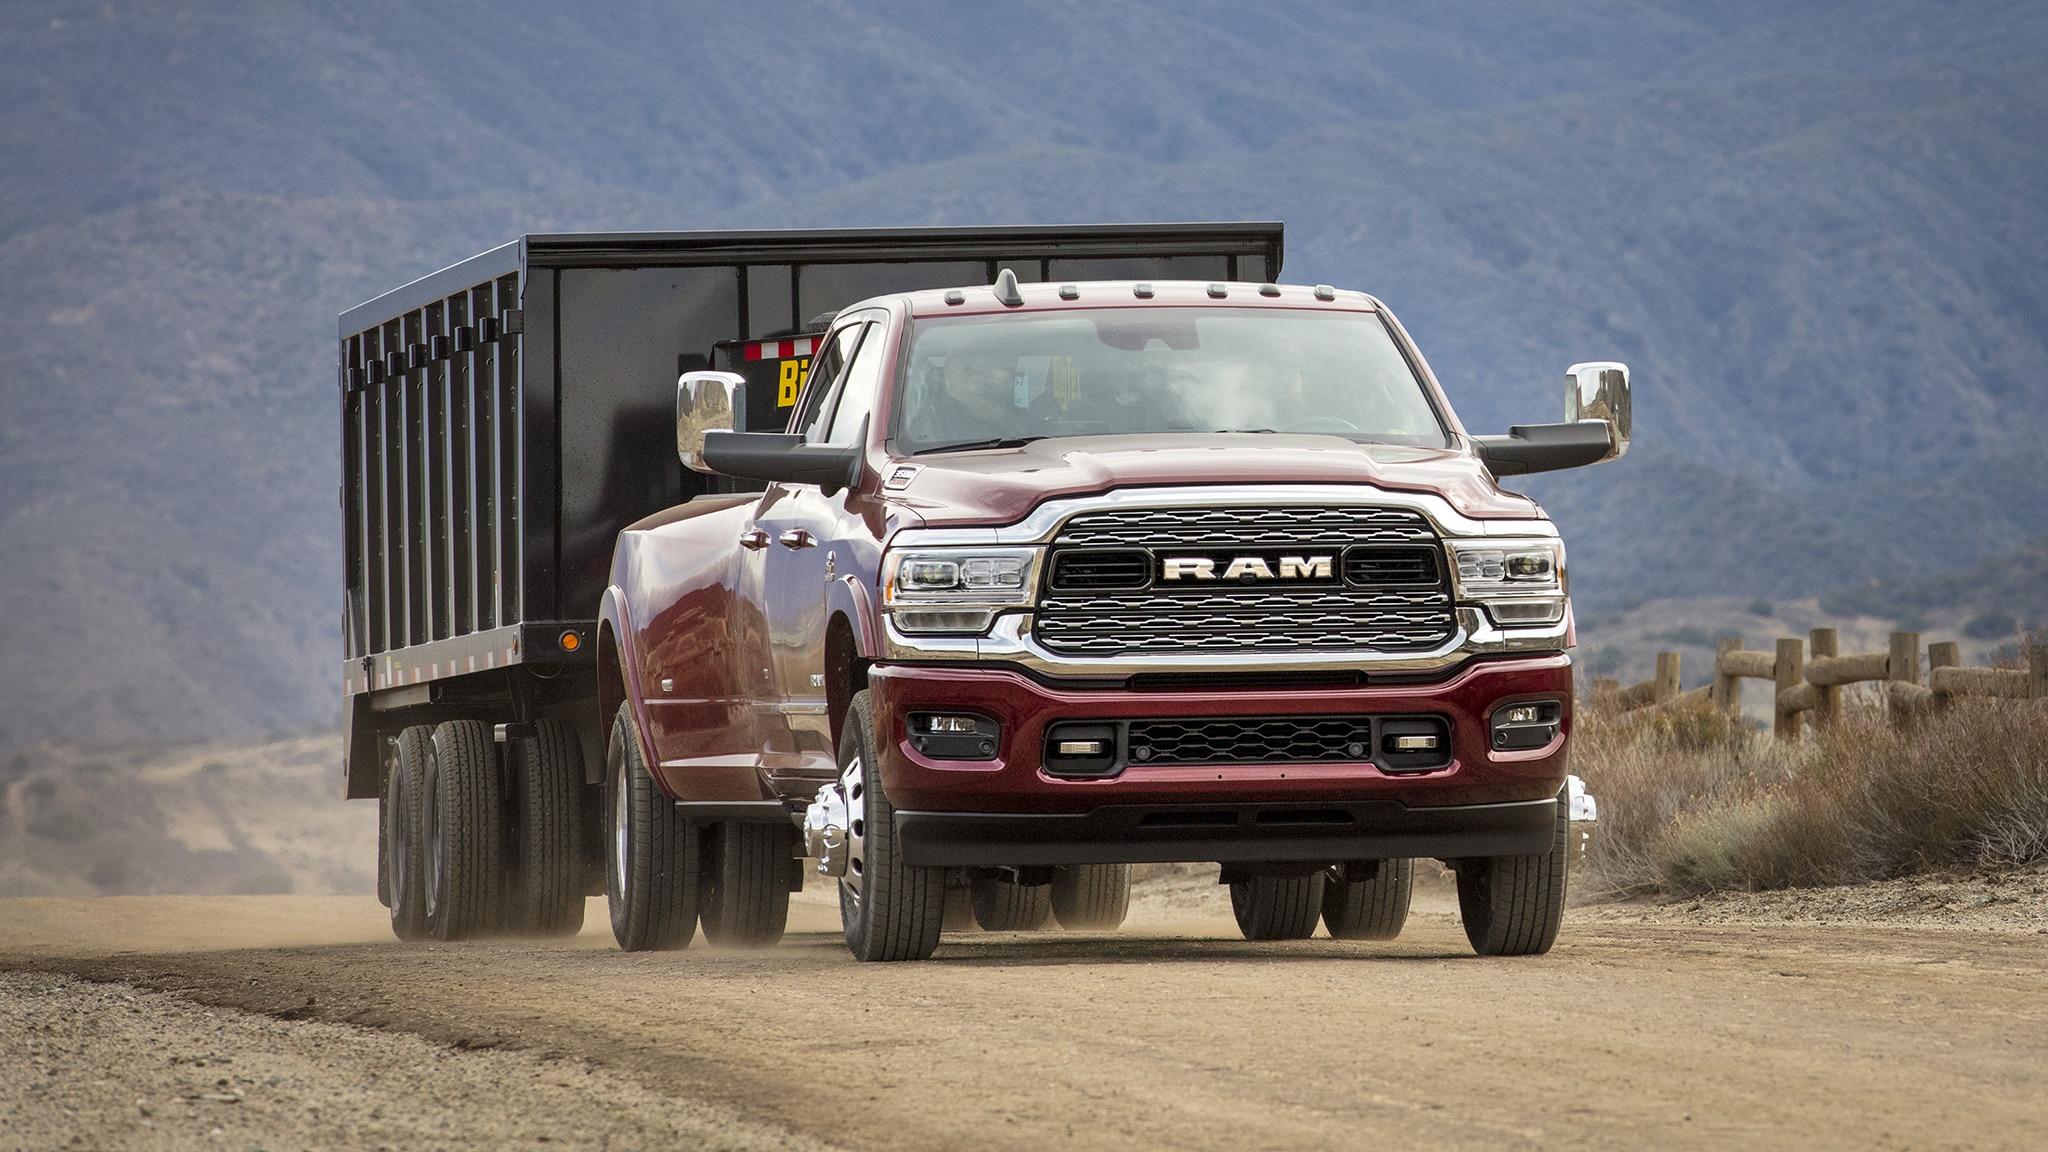 Why The 2019 Ram 3500 Makes A Mind Blowing 000 LB FT Of Torque